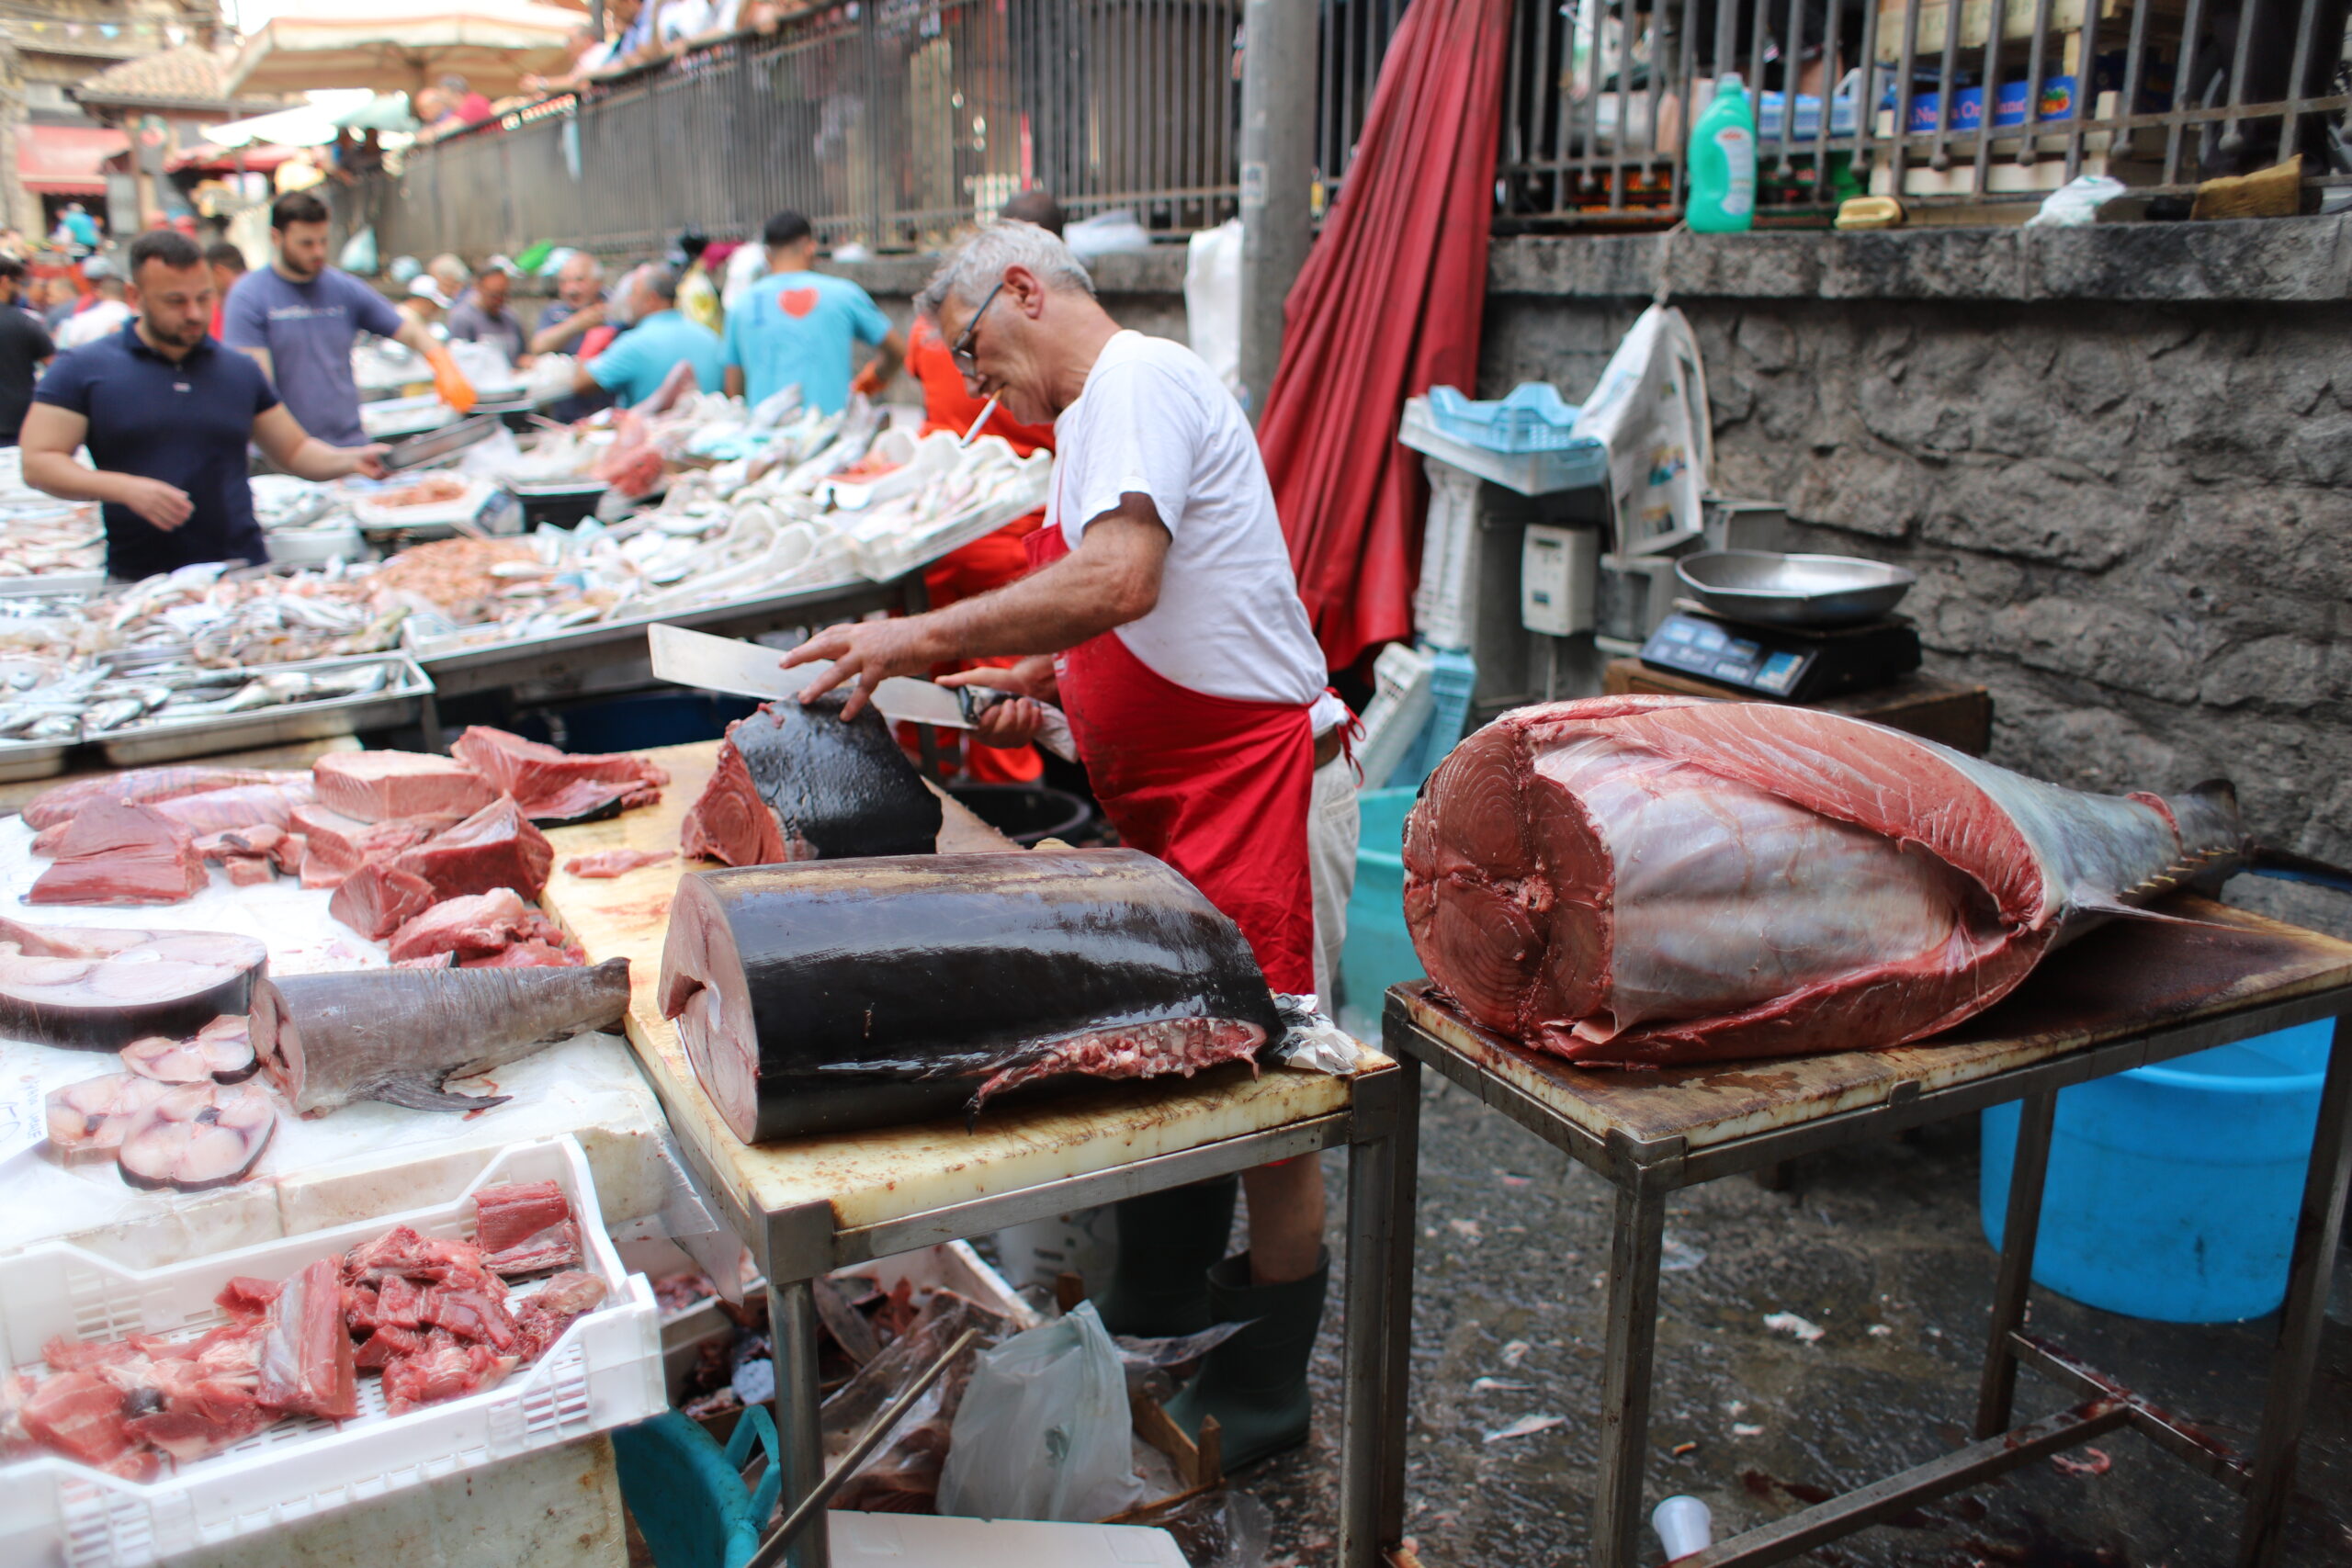 The final image shows a vendor carefully cutting large pieces of tuna. The deep red and dark hues of the fish flesh are striking against the more subdued colors of the background. The vendor's focused expression and precise movements highlight the skill involved in preparing the fish. The market stalls, lined with various seafood items, create a dense and busy atmosphere, reinforcing the market's role as a vital hub for the local community. The wet cobblestones reflect the morning light, adding a dynamic quality to the scene.